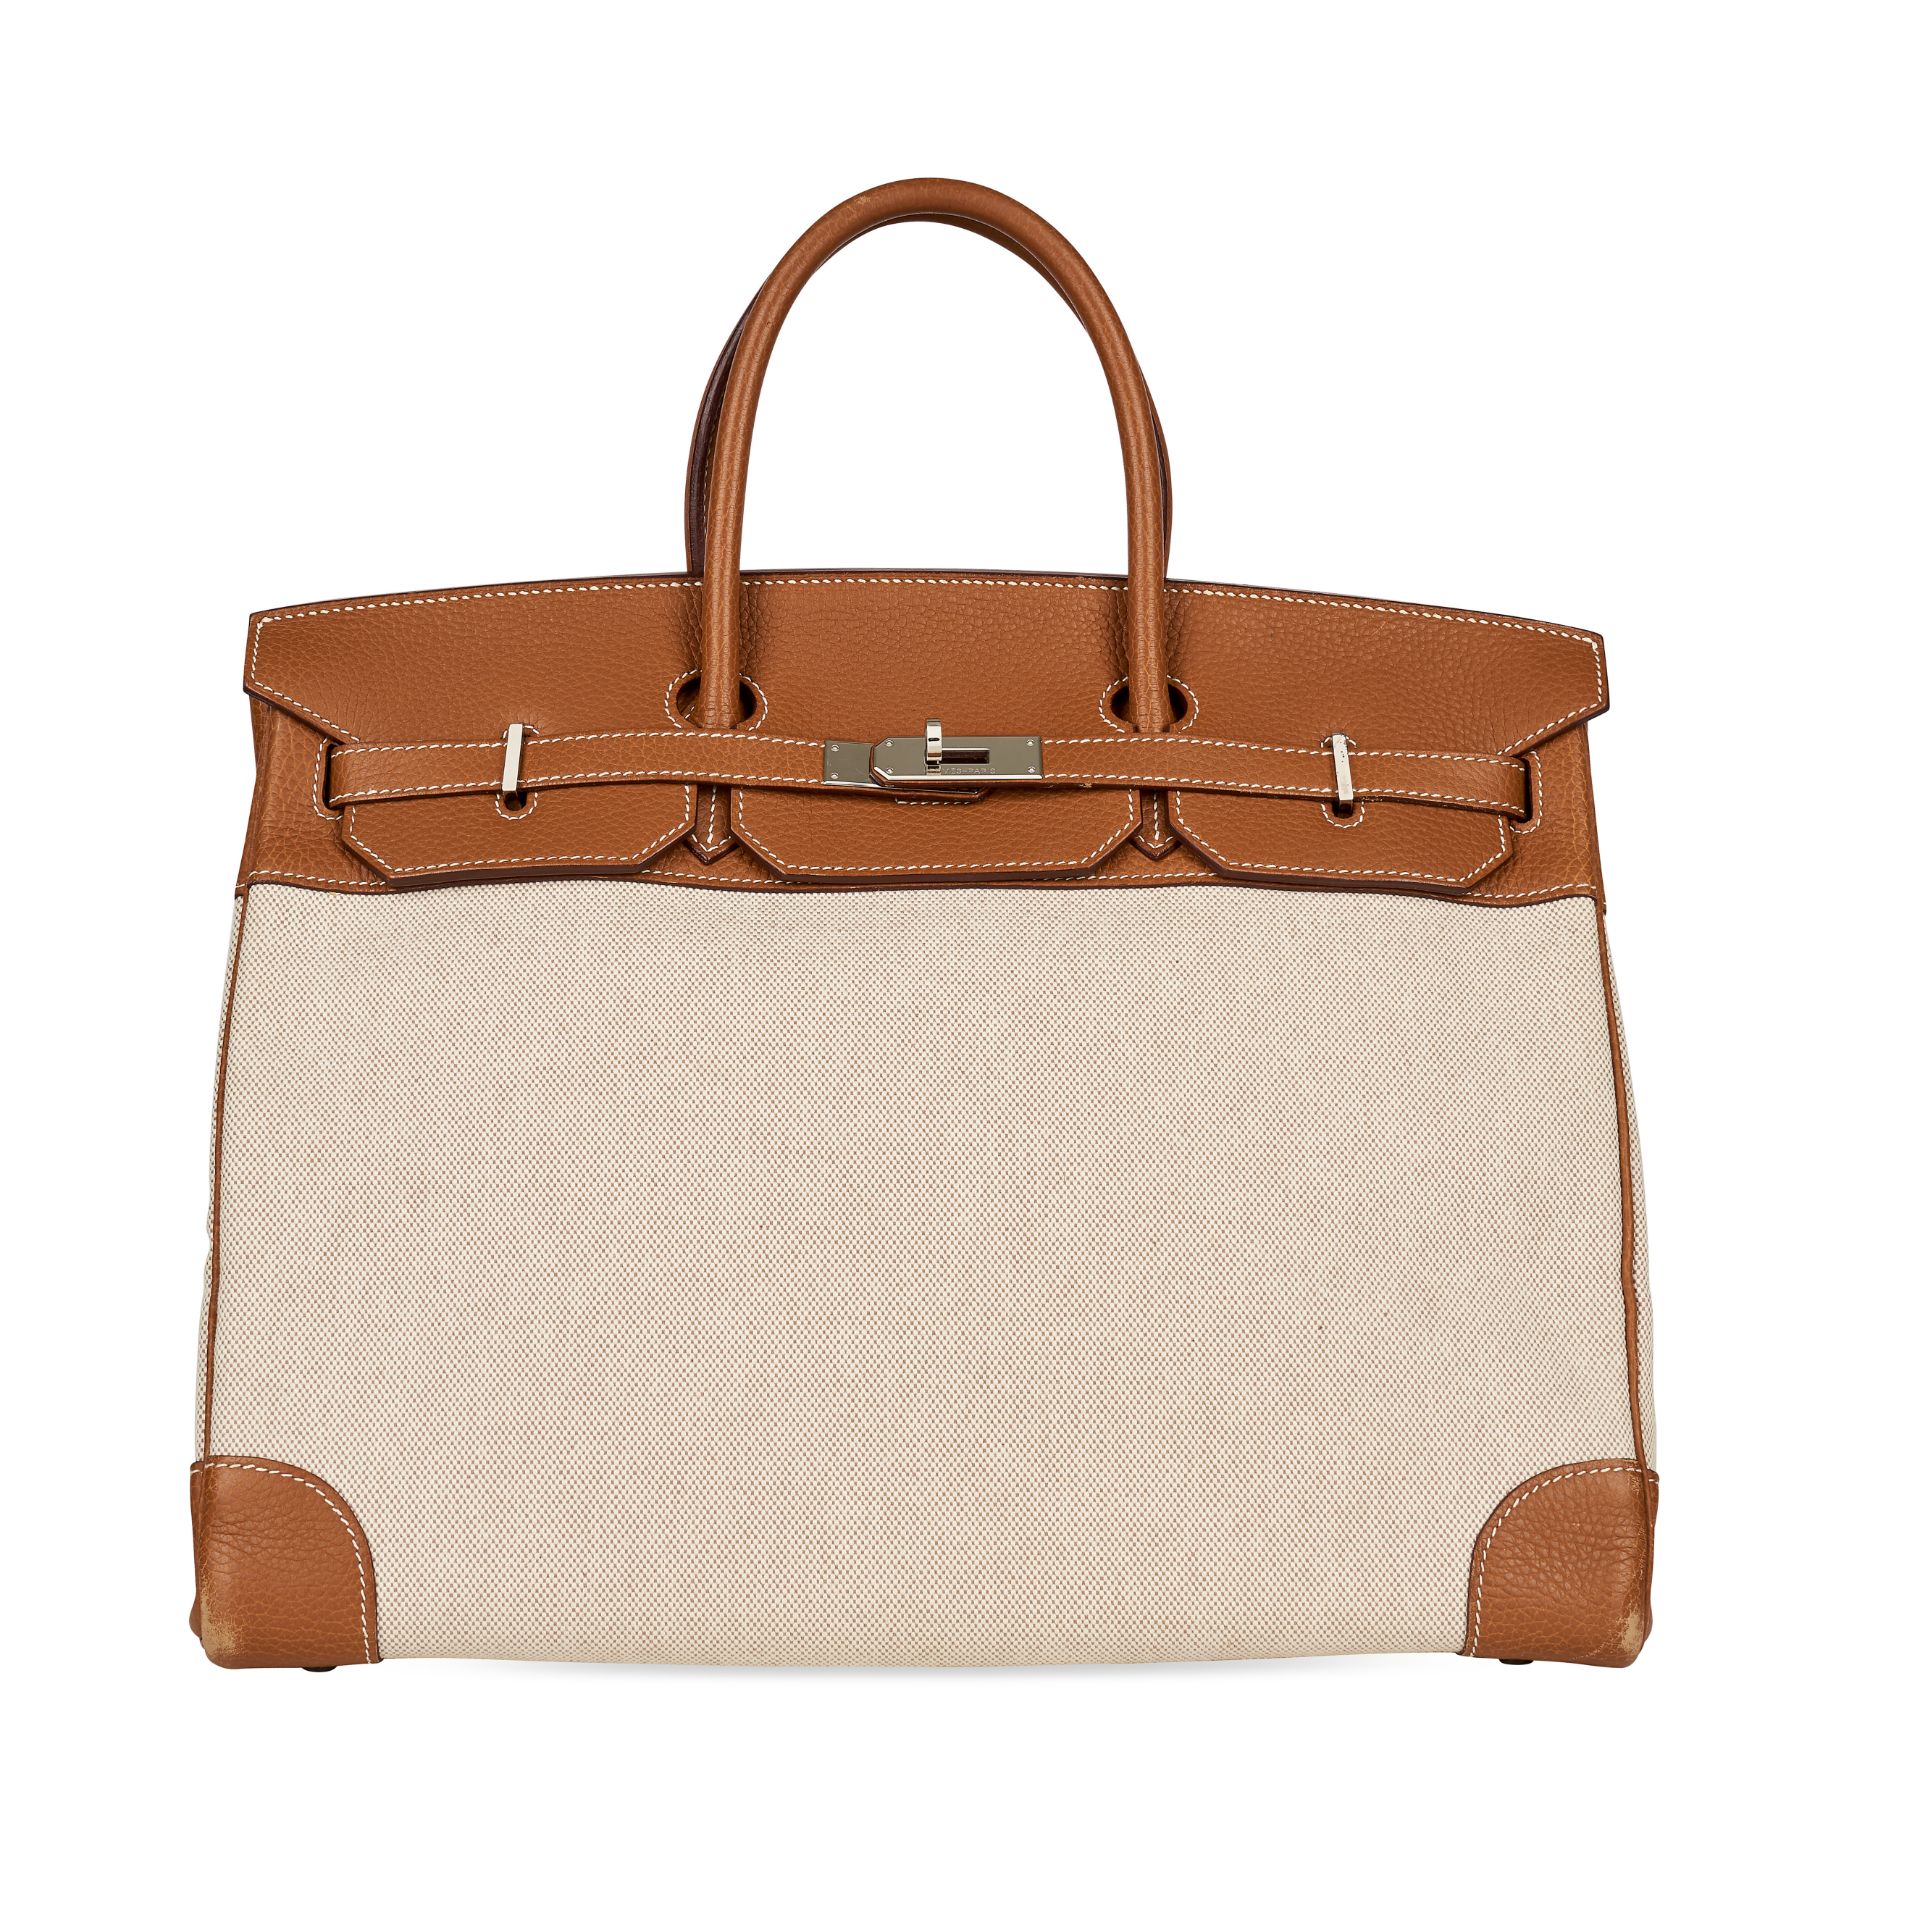 HERMES GOLD AND CANVAS BIRKIN 4O BAG Condition grade C+. 40cm long, 32cm high. Top handle drop ... - Image 3 of 7